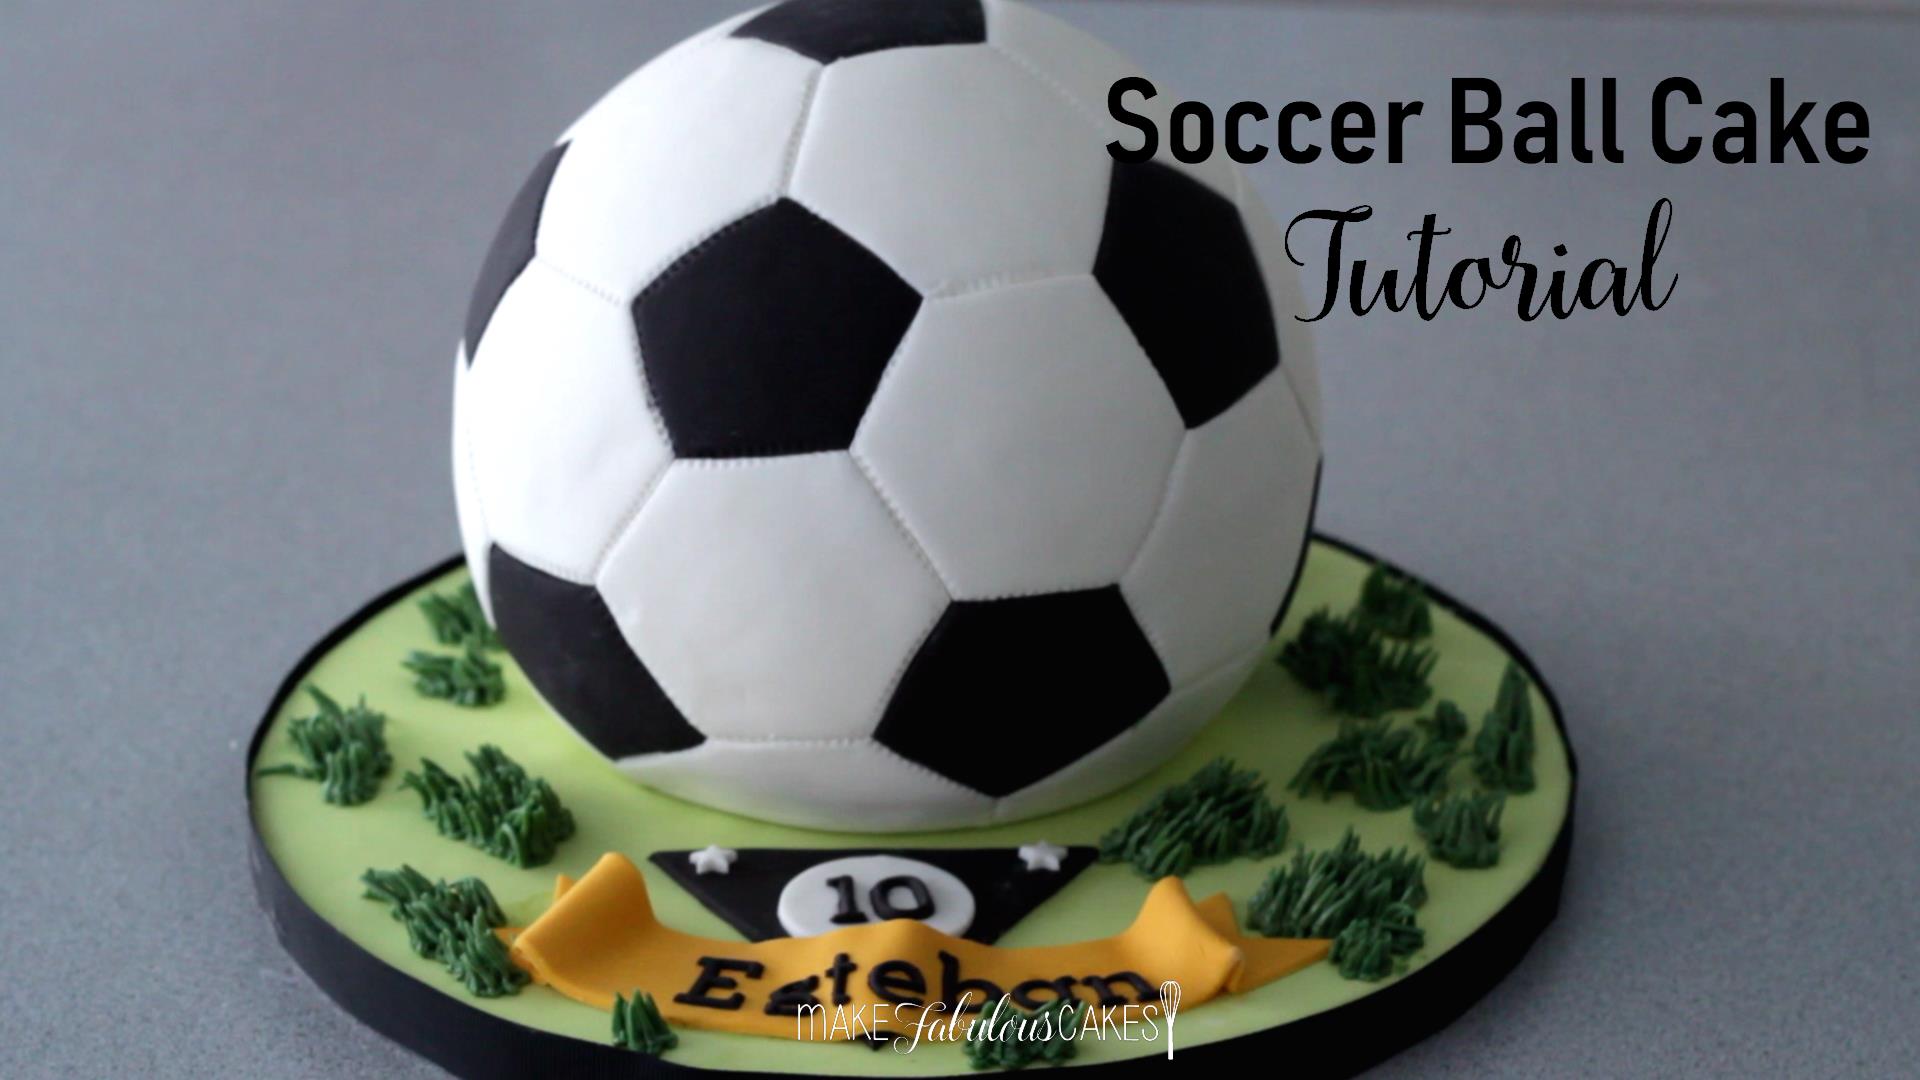 Football Cake- Free Nationwide Delivery! — New Cakes